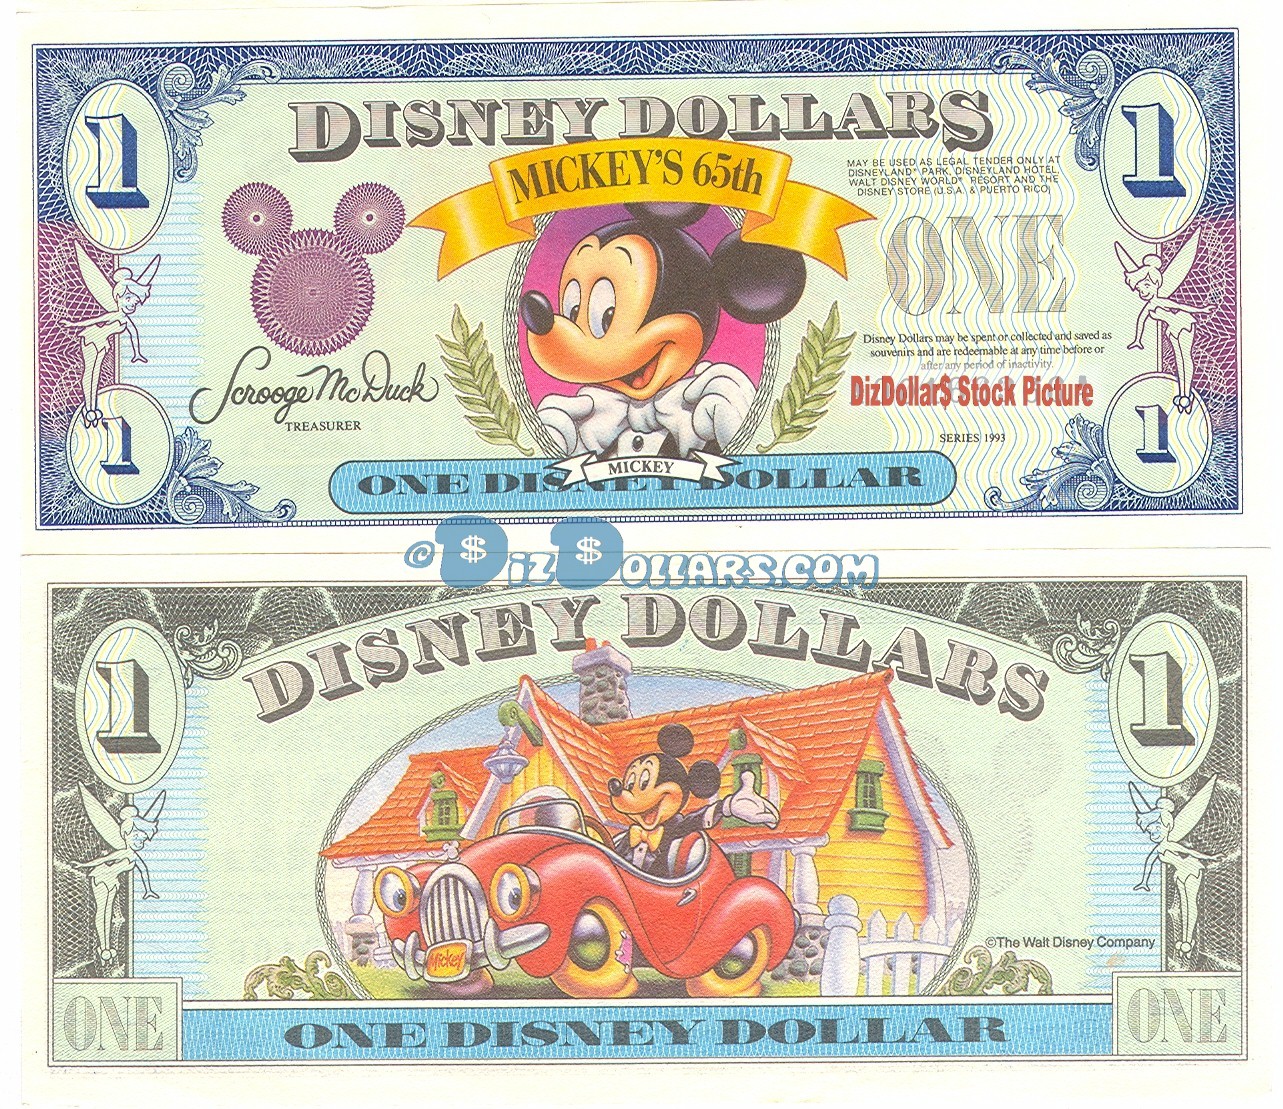 1993 "D" $1 UNC Disney Dollar - Bowtie Mickey front with Mickey in Toontown on back - Mickey's 65th Birthday Series from Disney World ~ © DizDollars.com